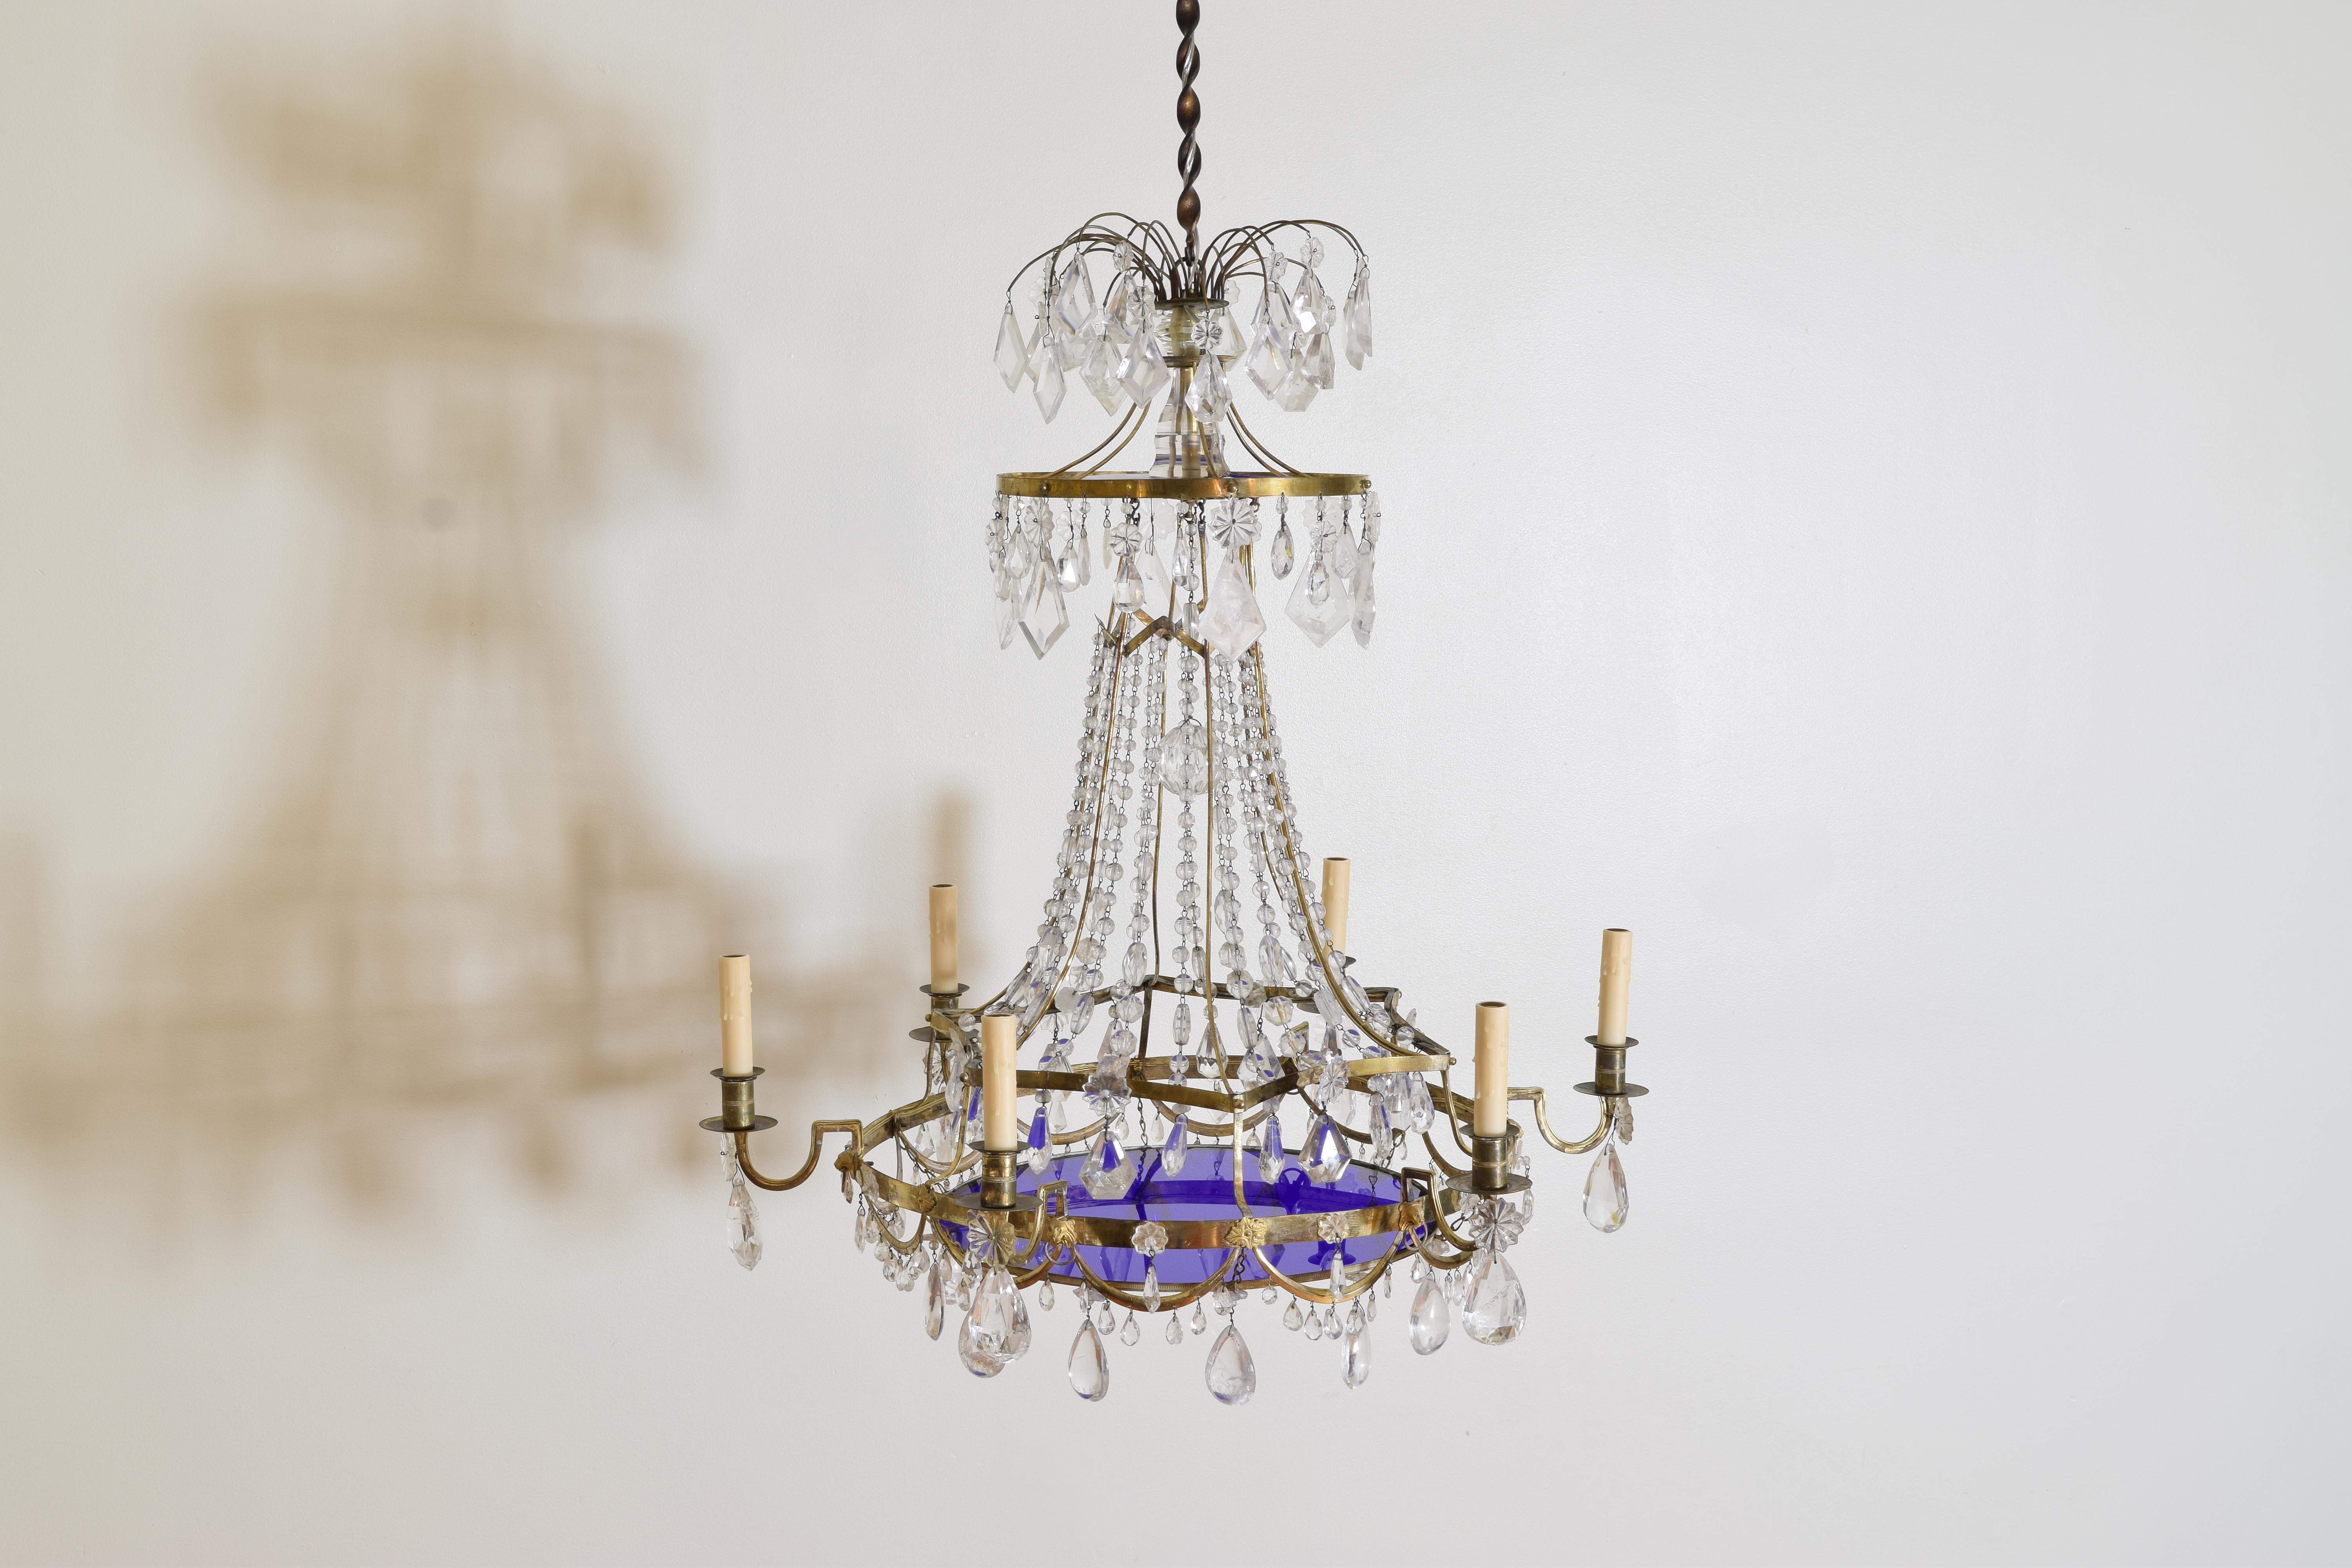 Constructed entirely of ormolu brass with clear glass bead chains, prisms, and a centered faceted hanging sphere, the bottom section with swags and cast rosettes issuing 6 arms, two cobalt blue glass disks, one at the top and one larger at the